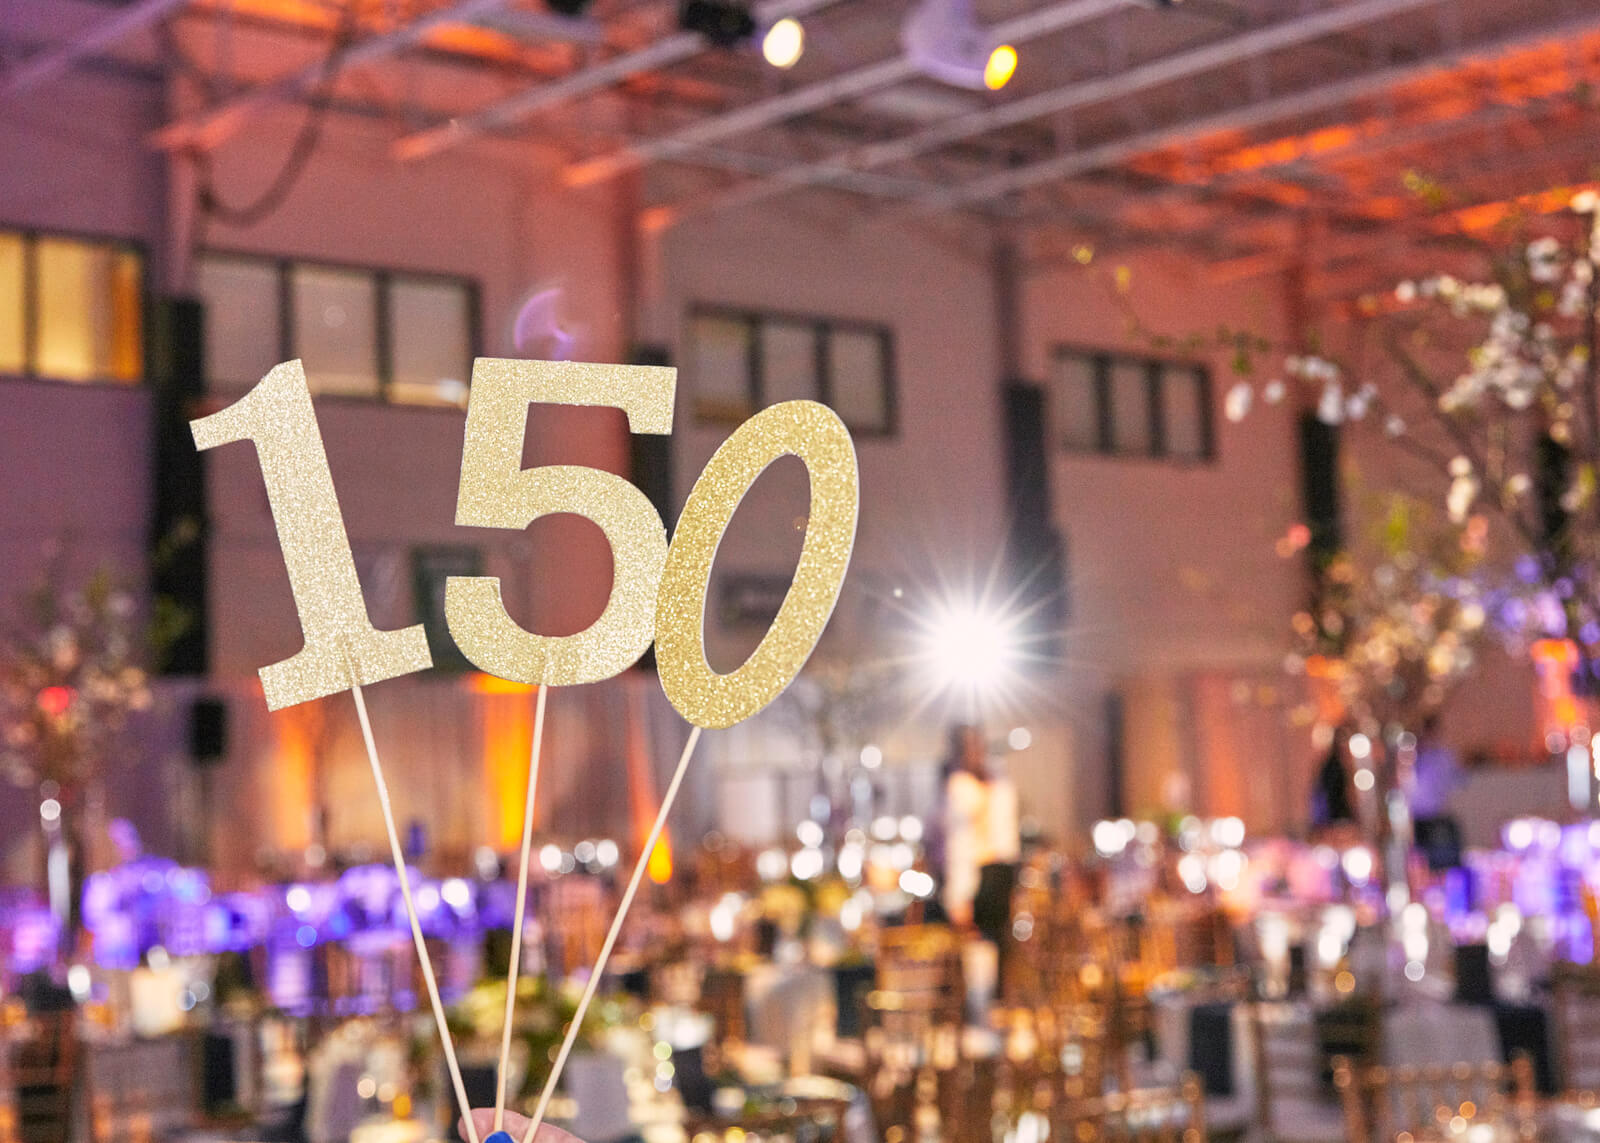 Blue & Gold Ball – 150 years